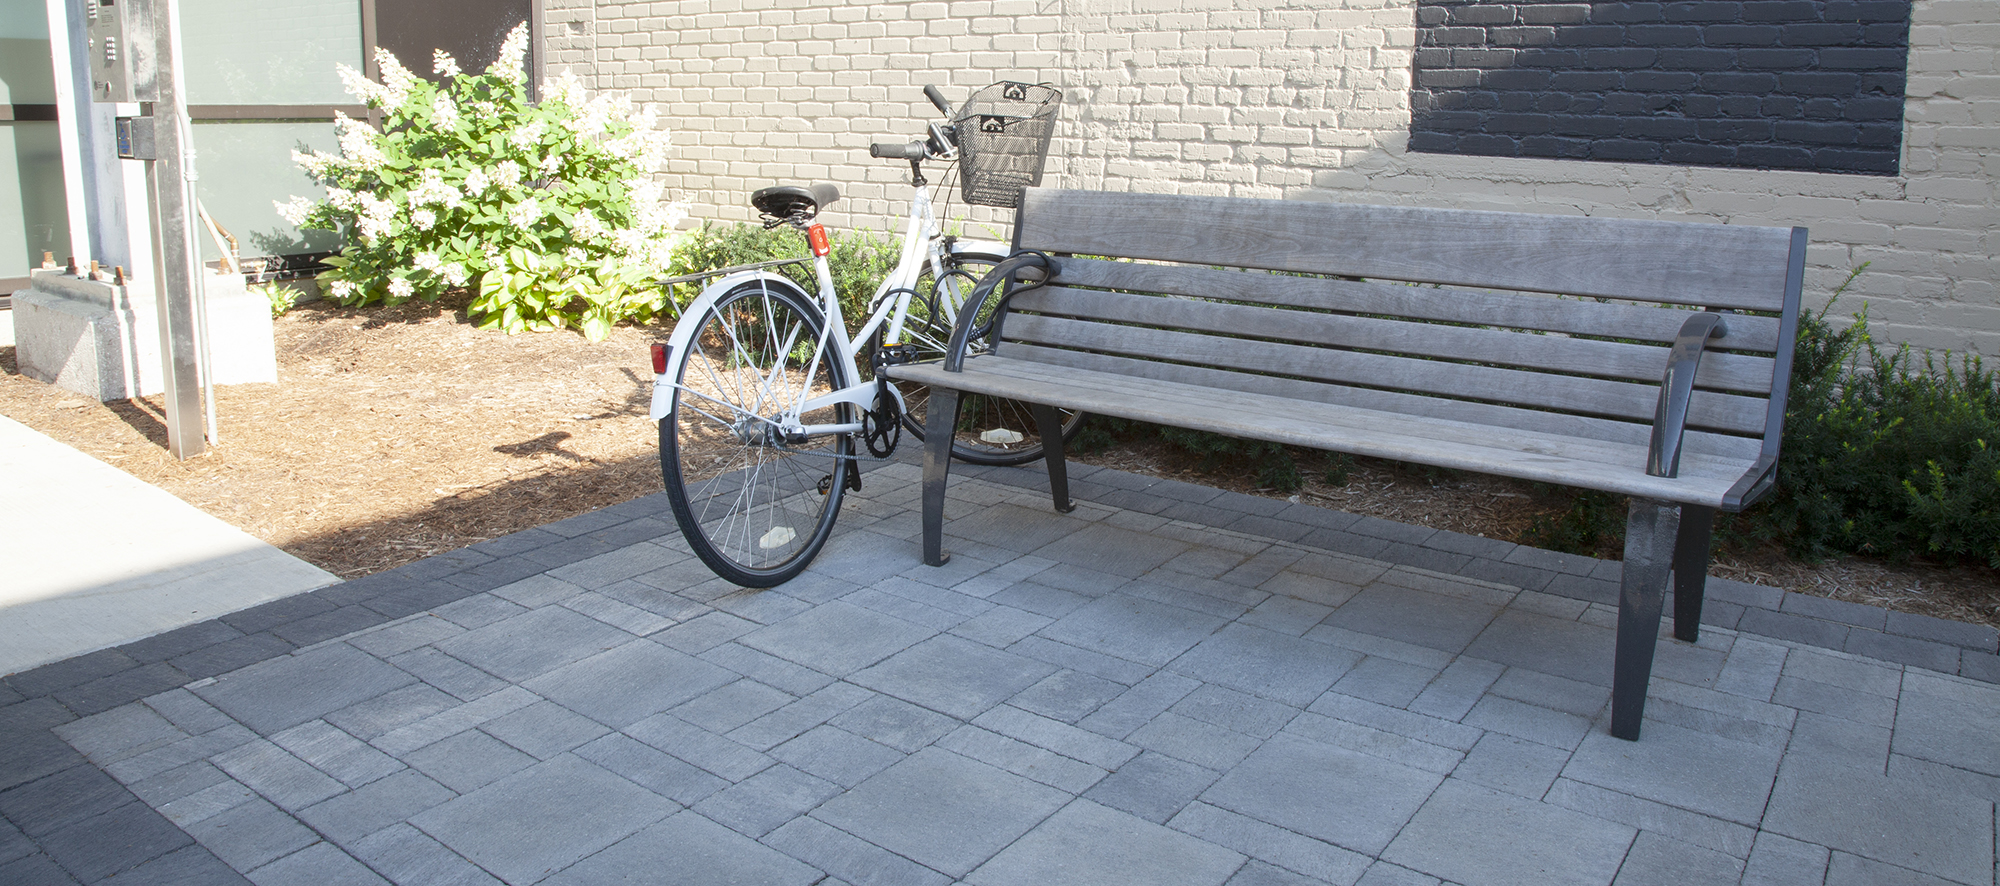 A bicycle and a bench sit on Unilock Il Campo pavers in different shapes and shades of grey, Surrounded by paved gardens and a wall.